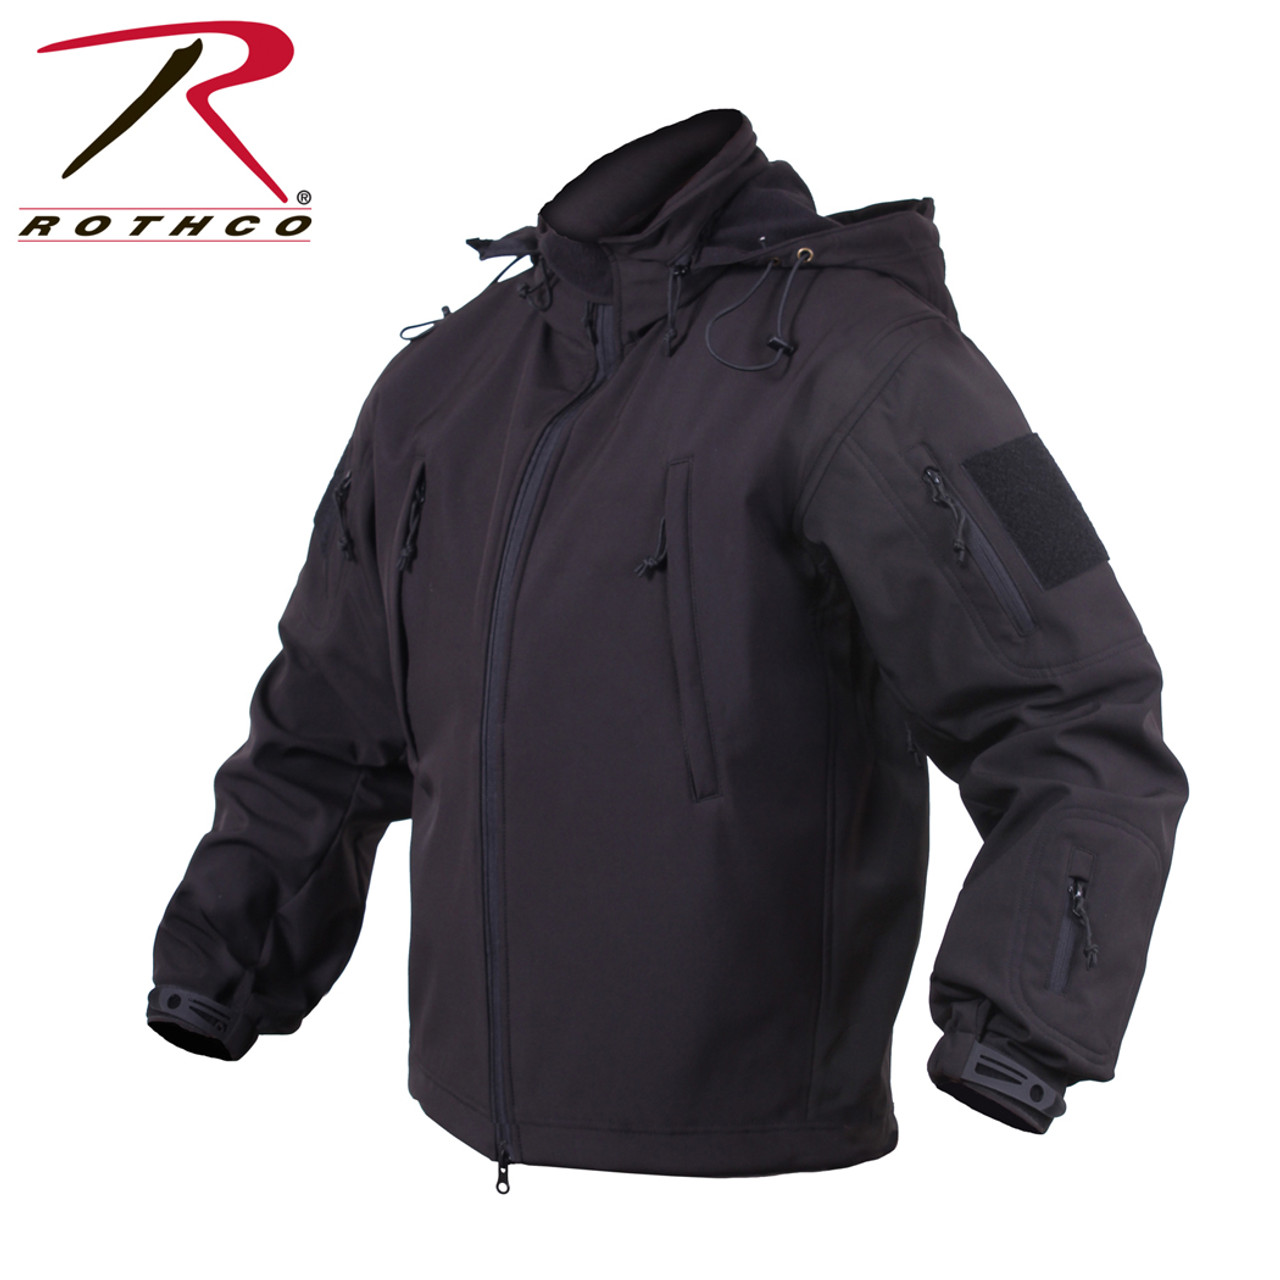 Shop Black Rothco Soft Shell Concealed Carry Jackets - Fatigues Army Navy